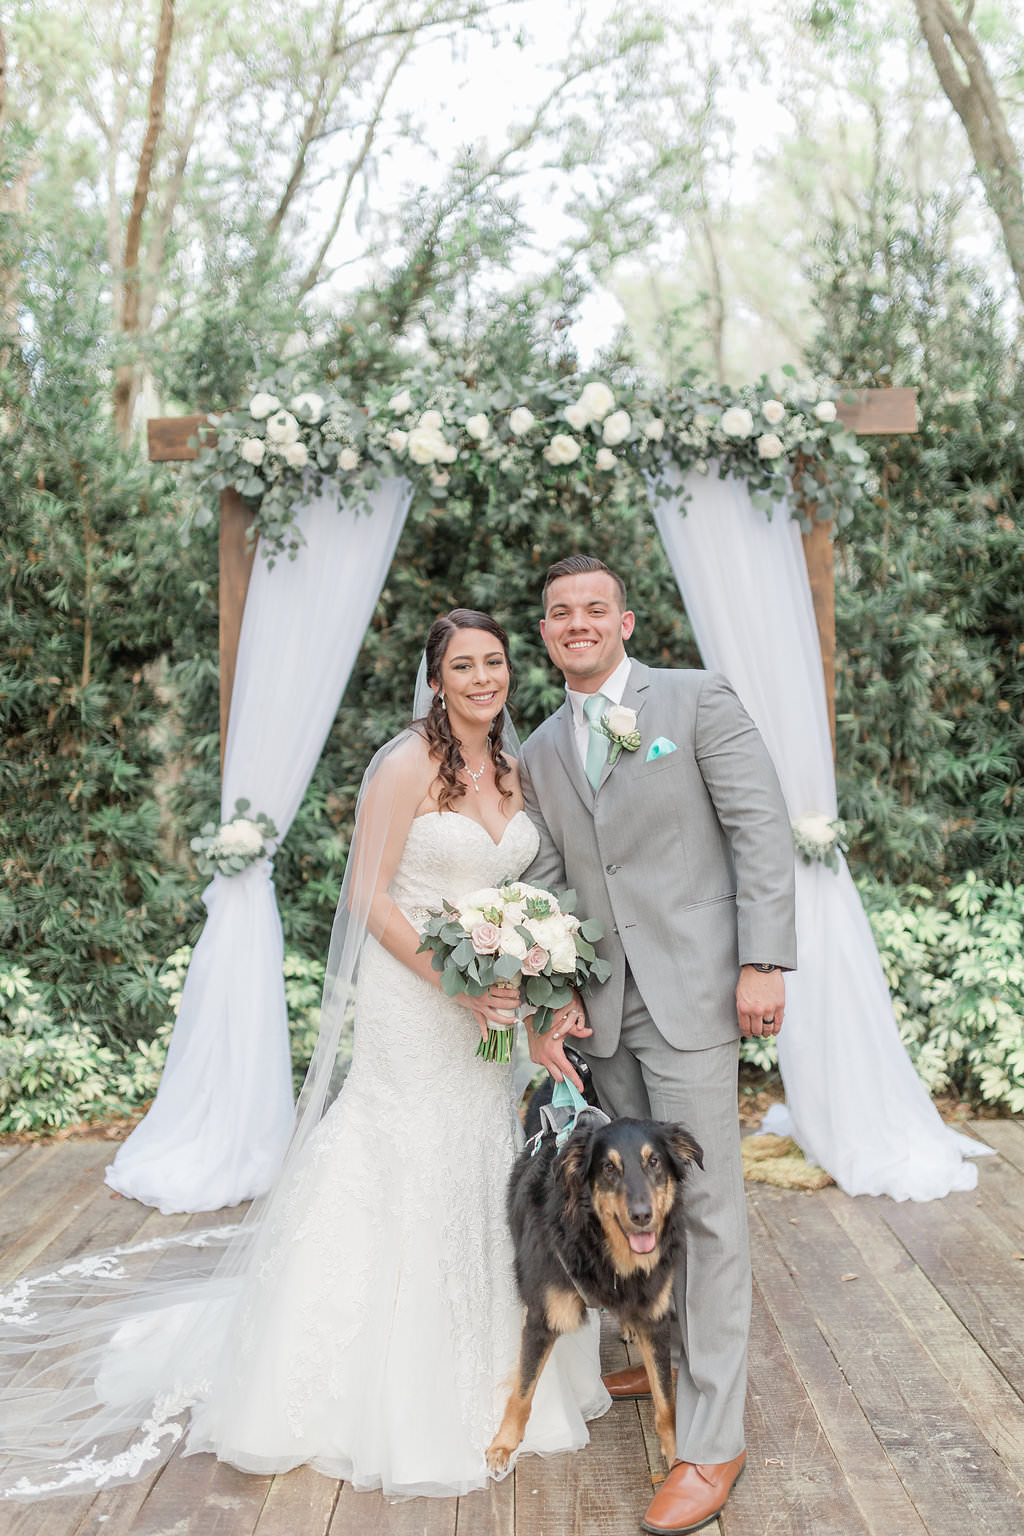 Outdoor Rustic Elegant Bride, Groom and Dog Wedding Portrait, Bride in Sweetheart Strapless Lace Fit and Flare Wedding Dress, Groom in Grey Suit, Wooden Arch with White Linen Draping with Ivory Roses and Greenery Garland | Plant City Wedding Venue Florida Rustic Barn Weddings